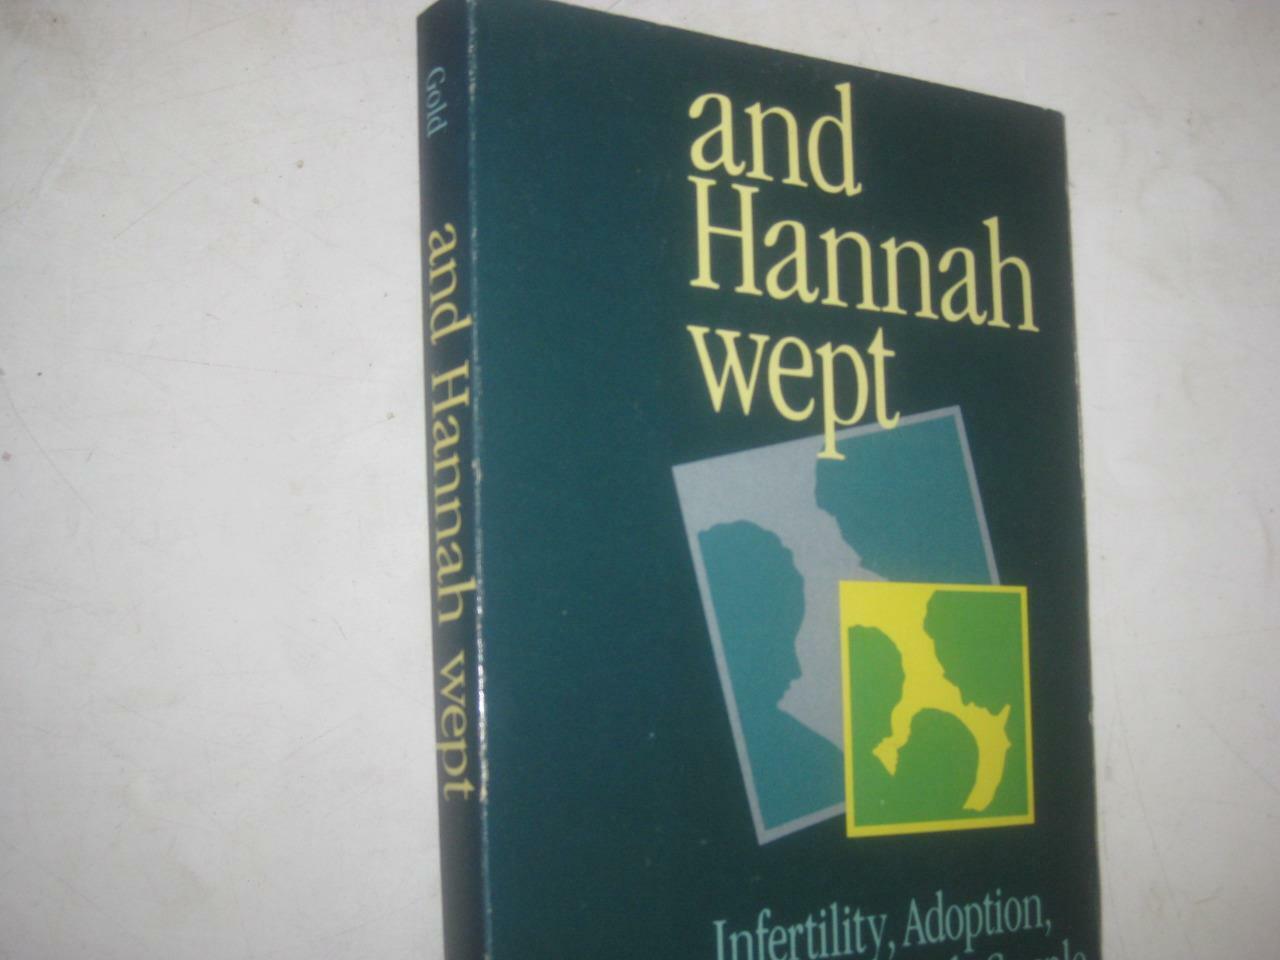 And Hannah Wept: Infertility Adoption and the Jewish Couple by Michael Gold